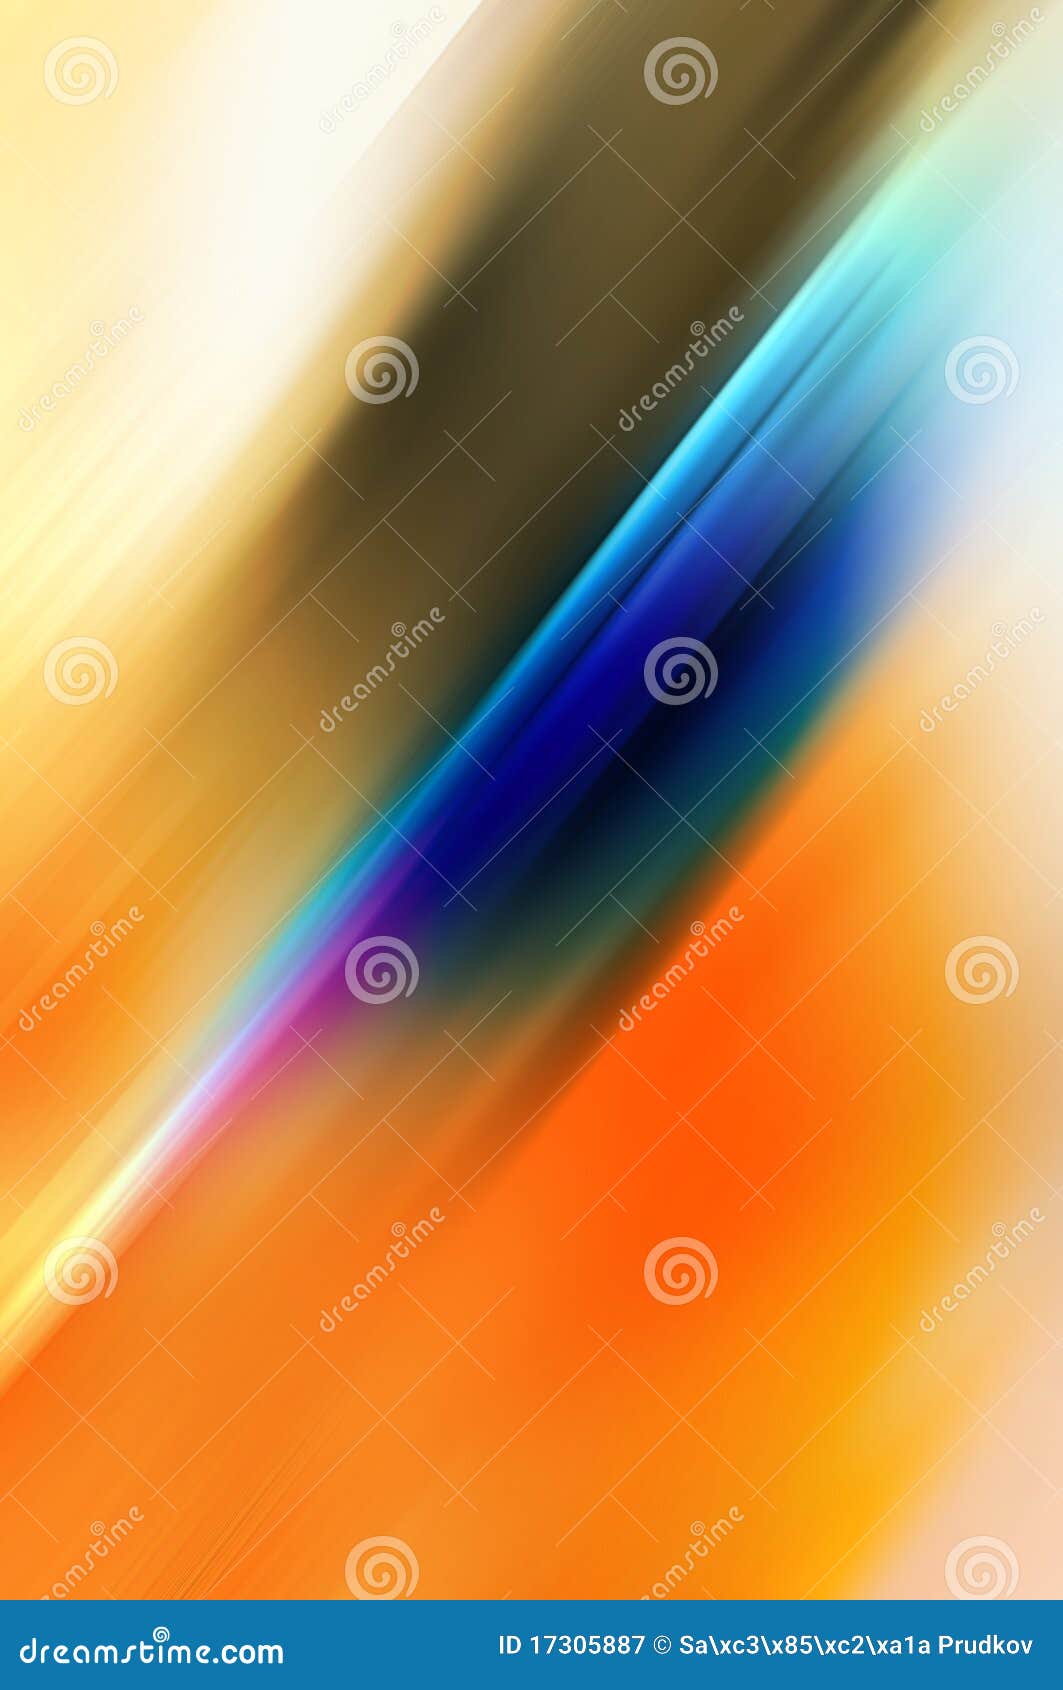 abstract background in blue and orange tones